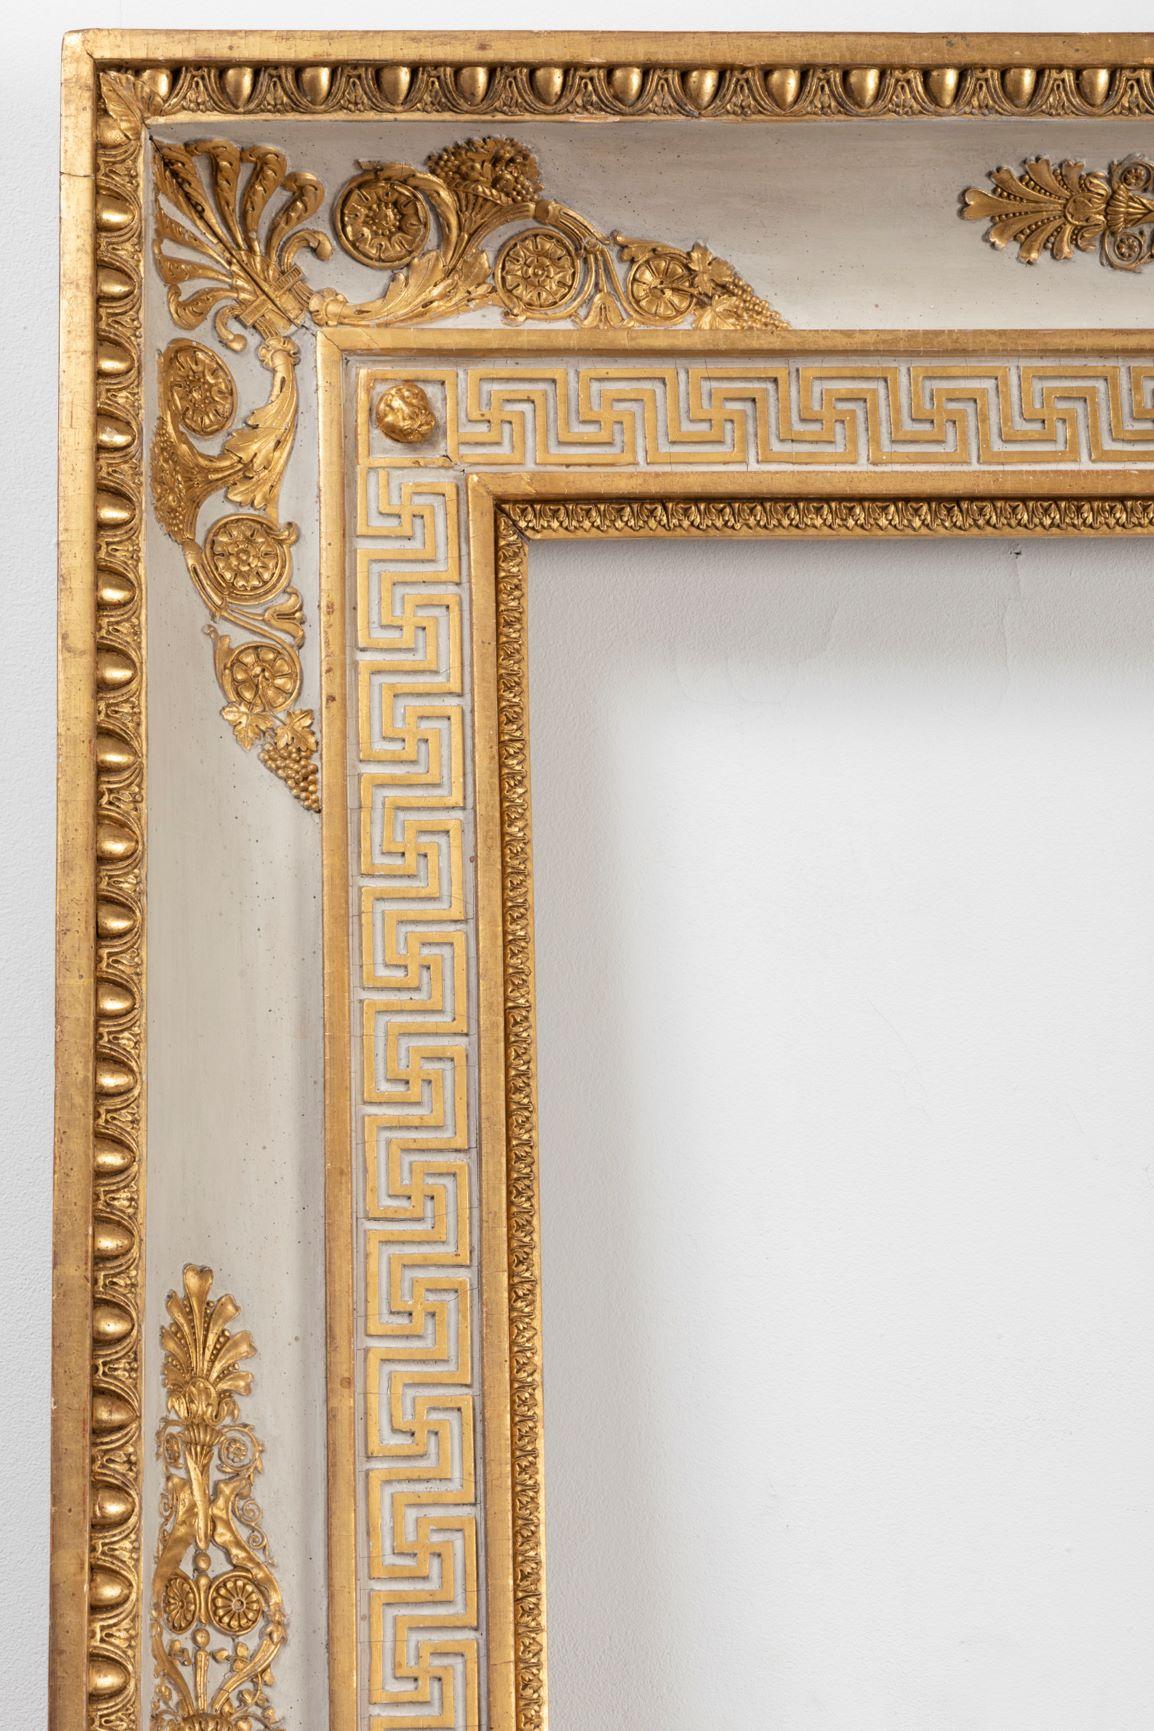 Splendid French Empire Carved Giltwood Frame or Mirror France Early 19th Century For Sale 2